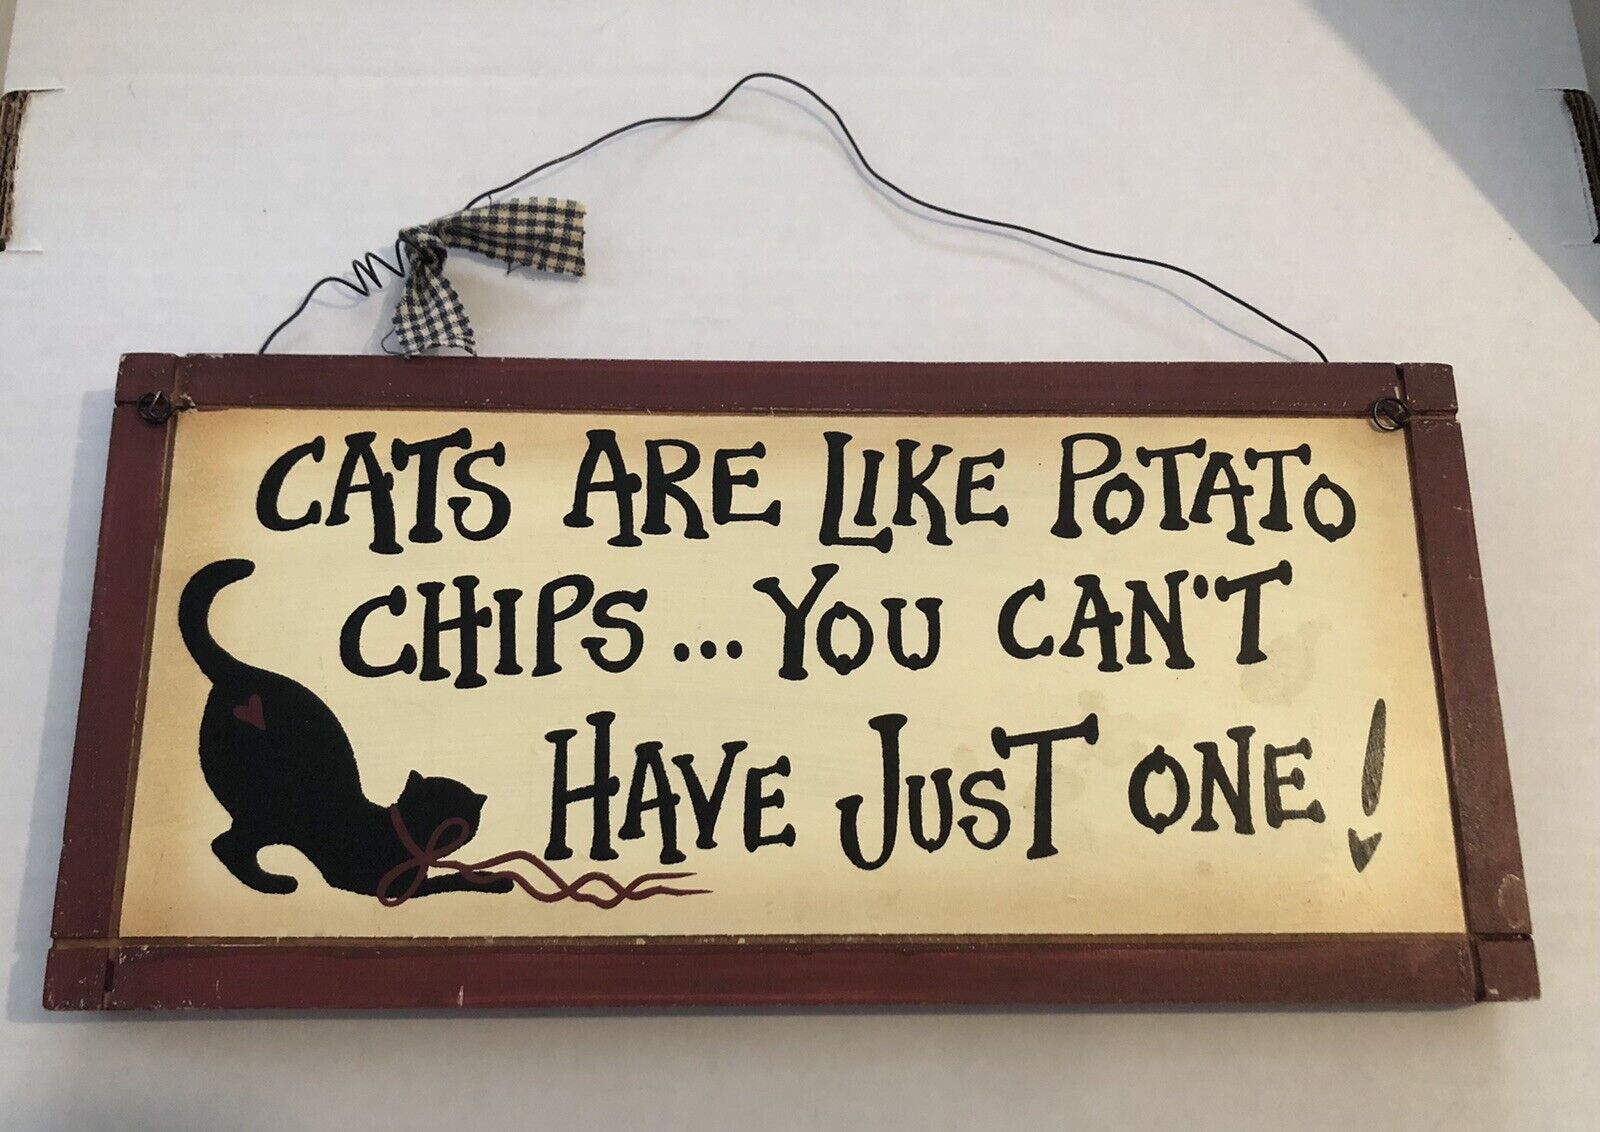 “Cats Are Like Potato Chips” Wood Sign Wall Hanging Decoration 11.5”